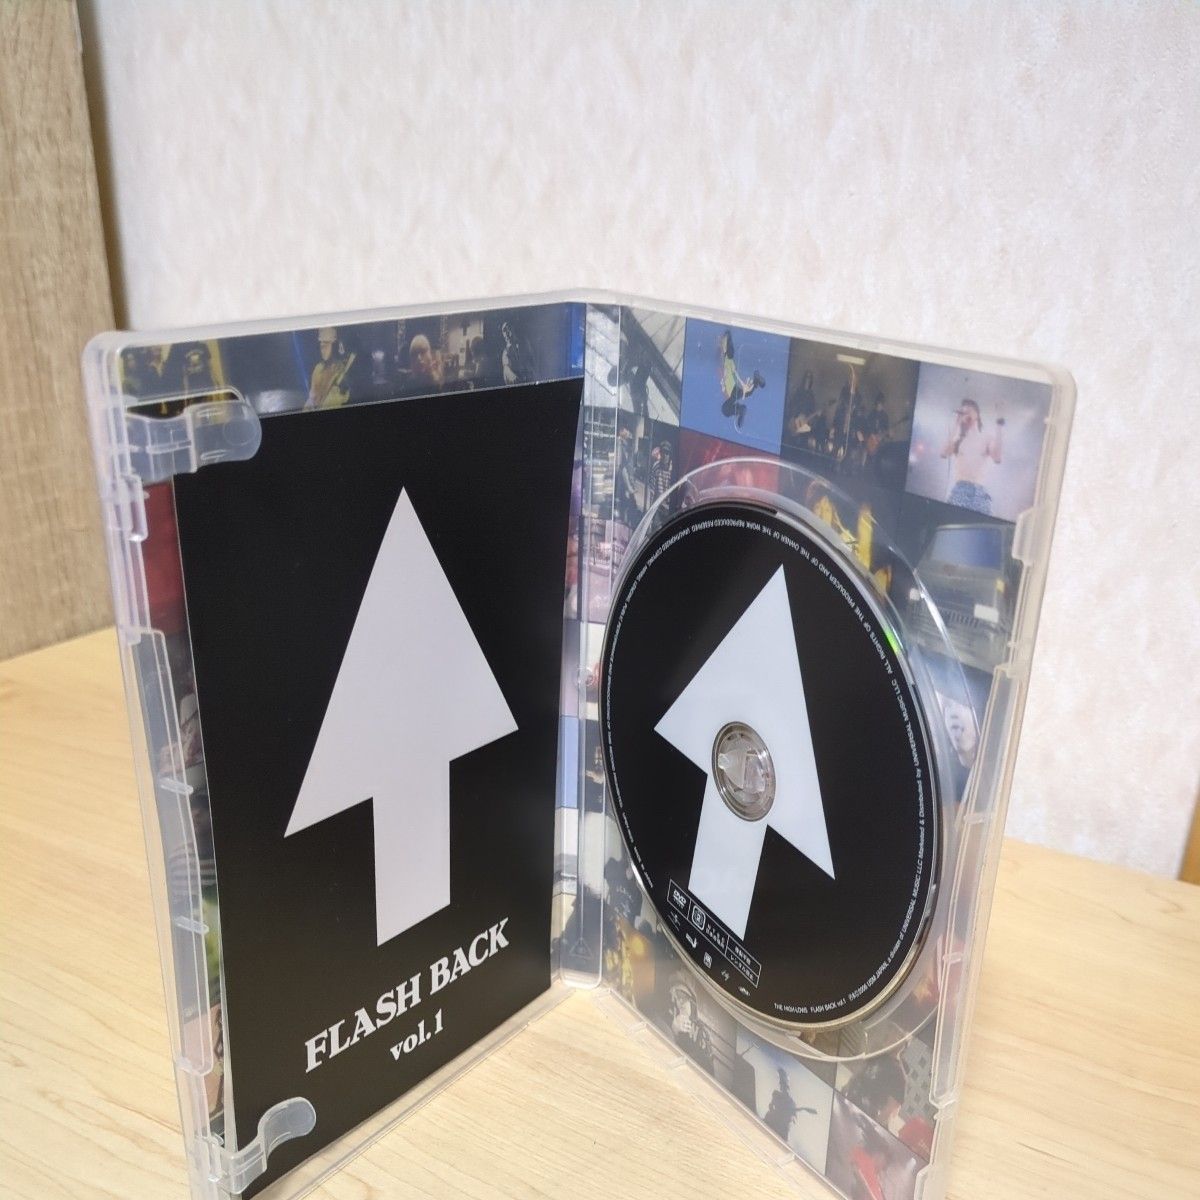 FLASH BACK vol.1 DVD THE HIGH-LOWS ザハイロウズ　動作確認済み